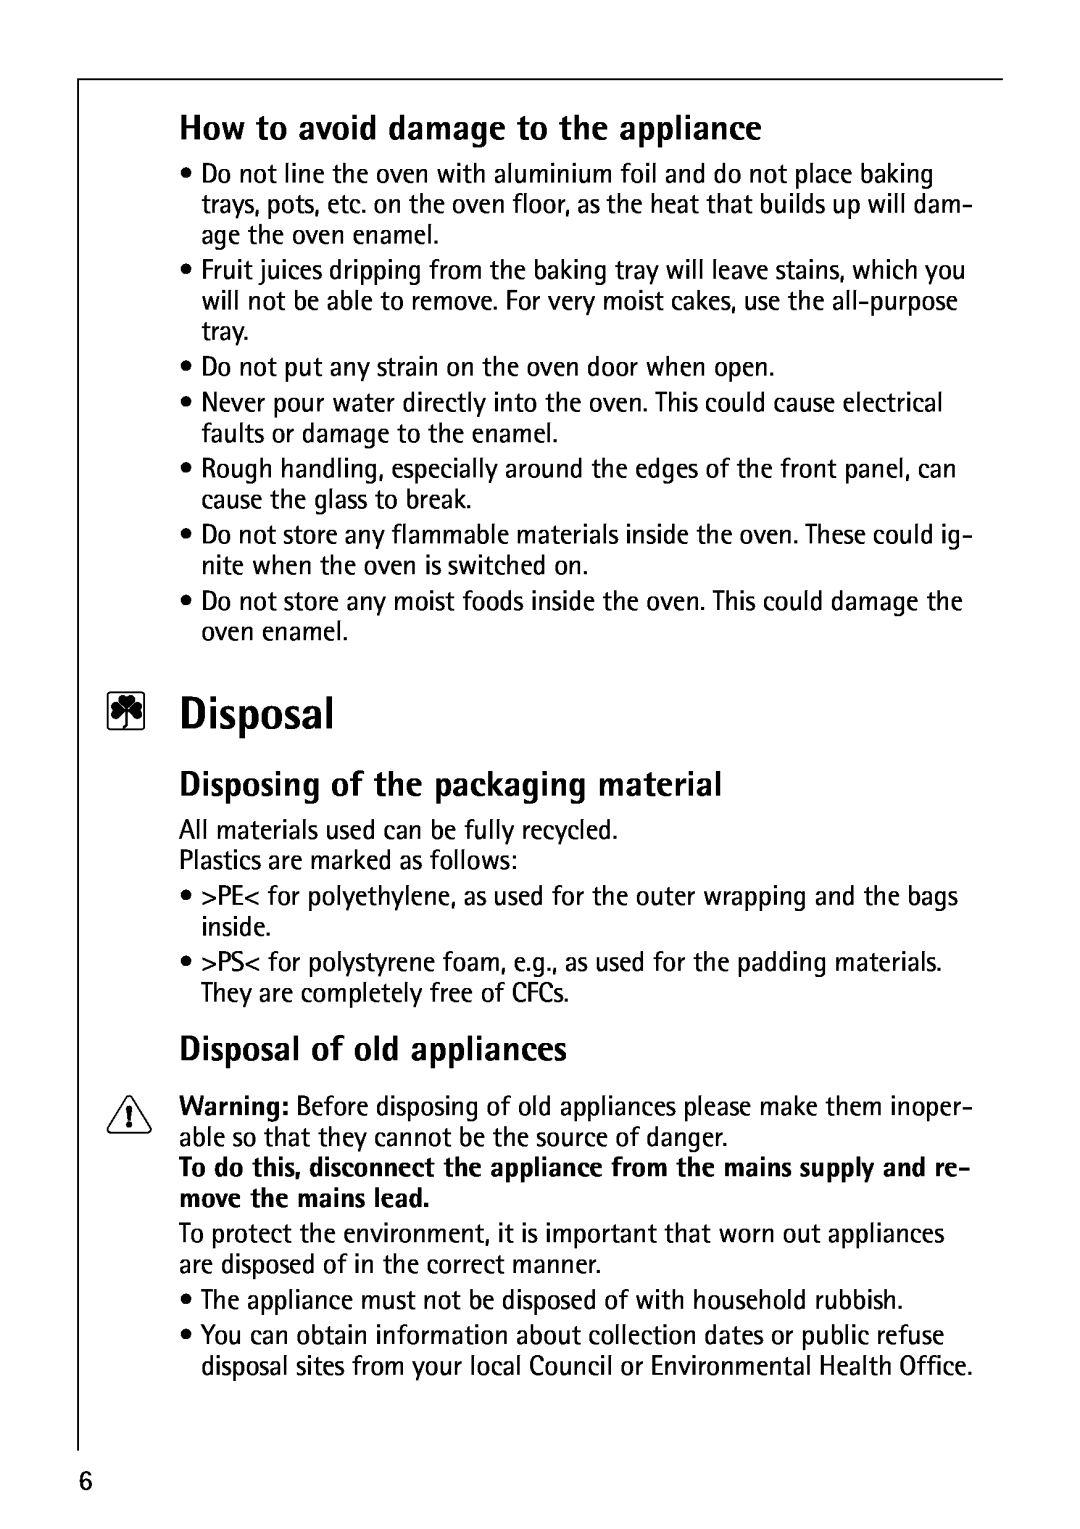 AEG B8920-1 manual 2Disposal, How to avoid damage to the appliance, Disposing of the packaging material 